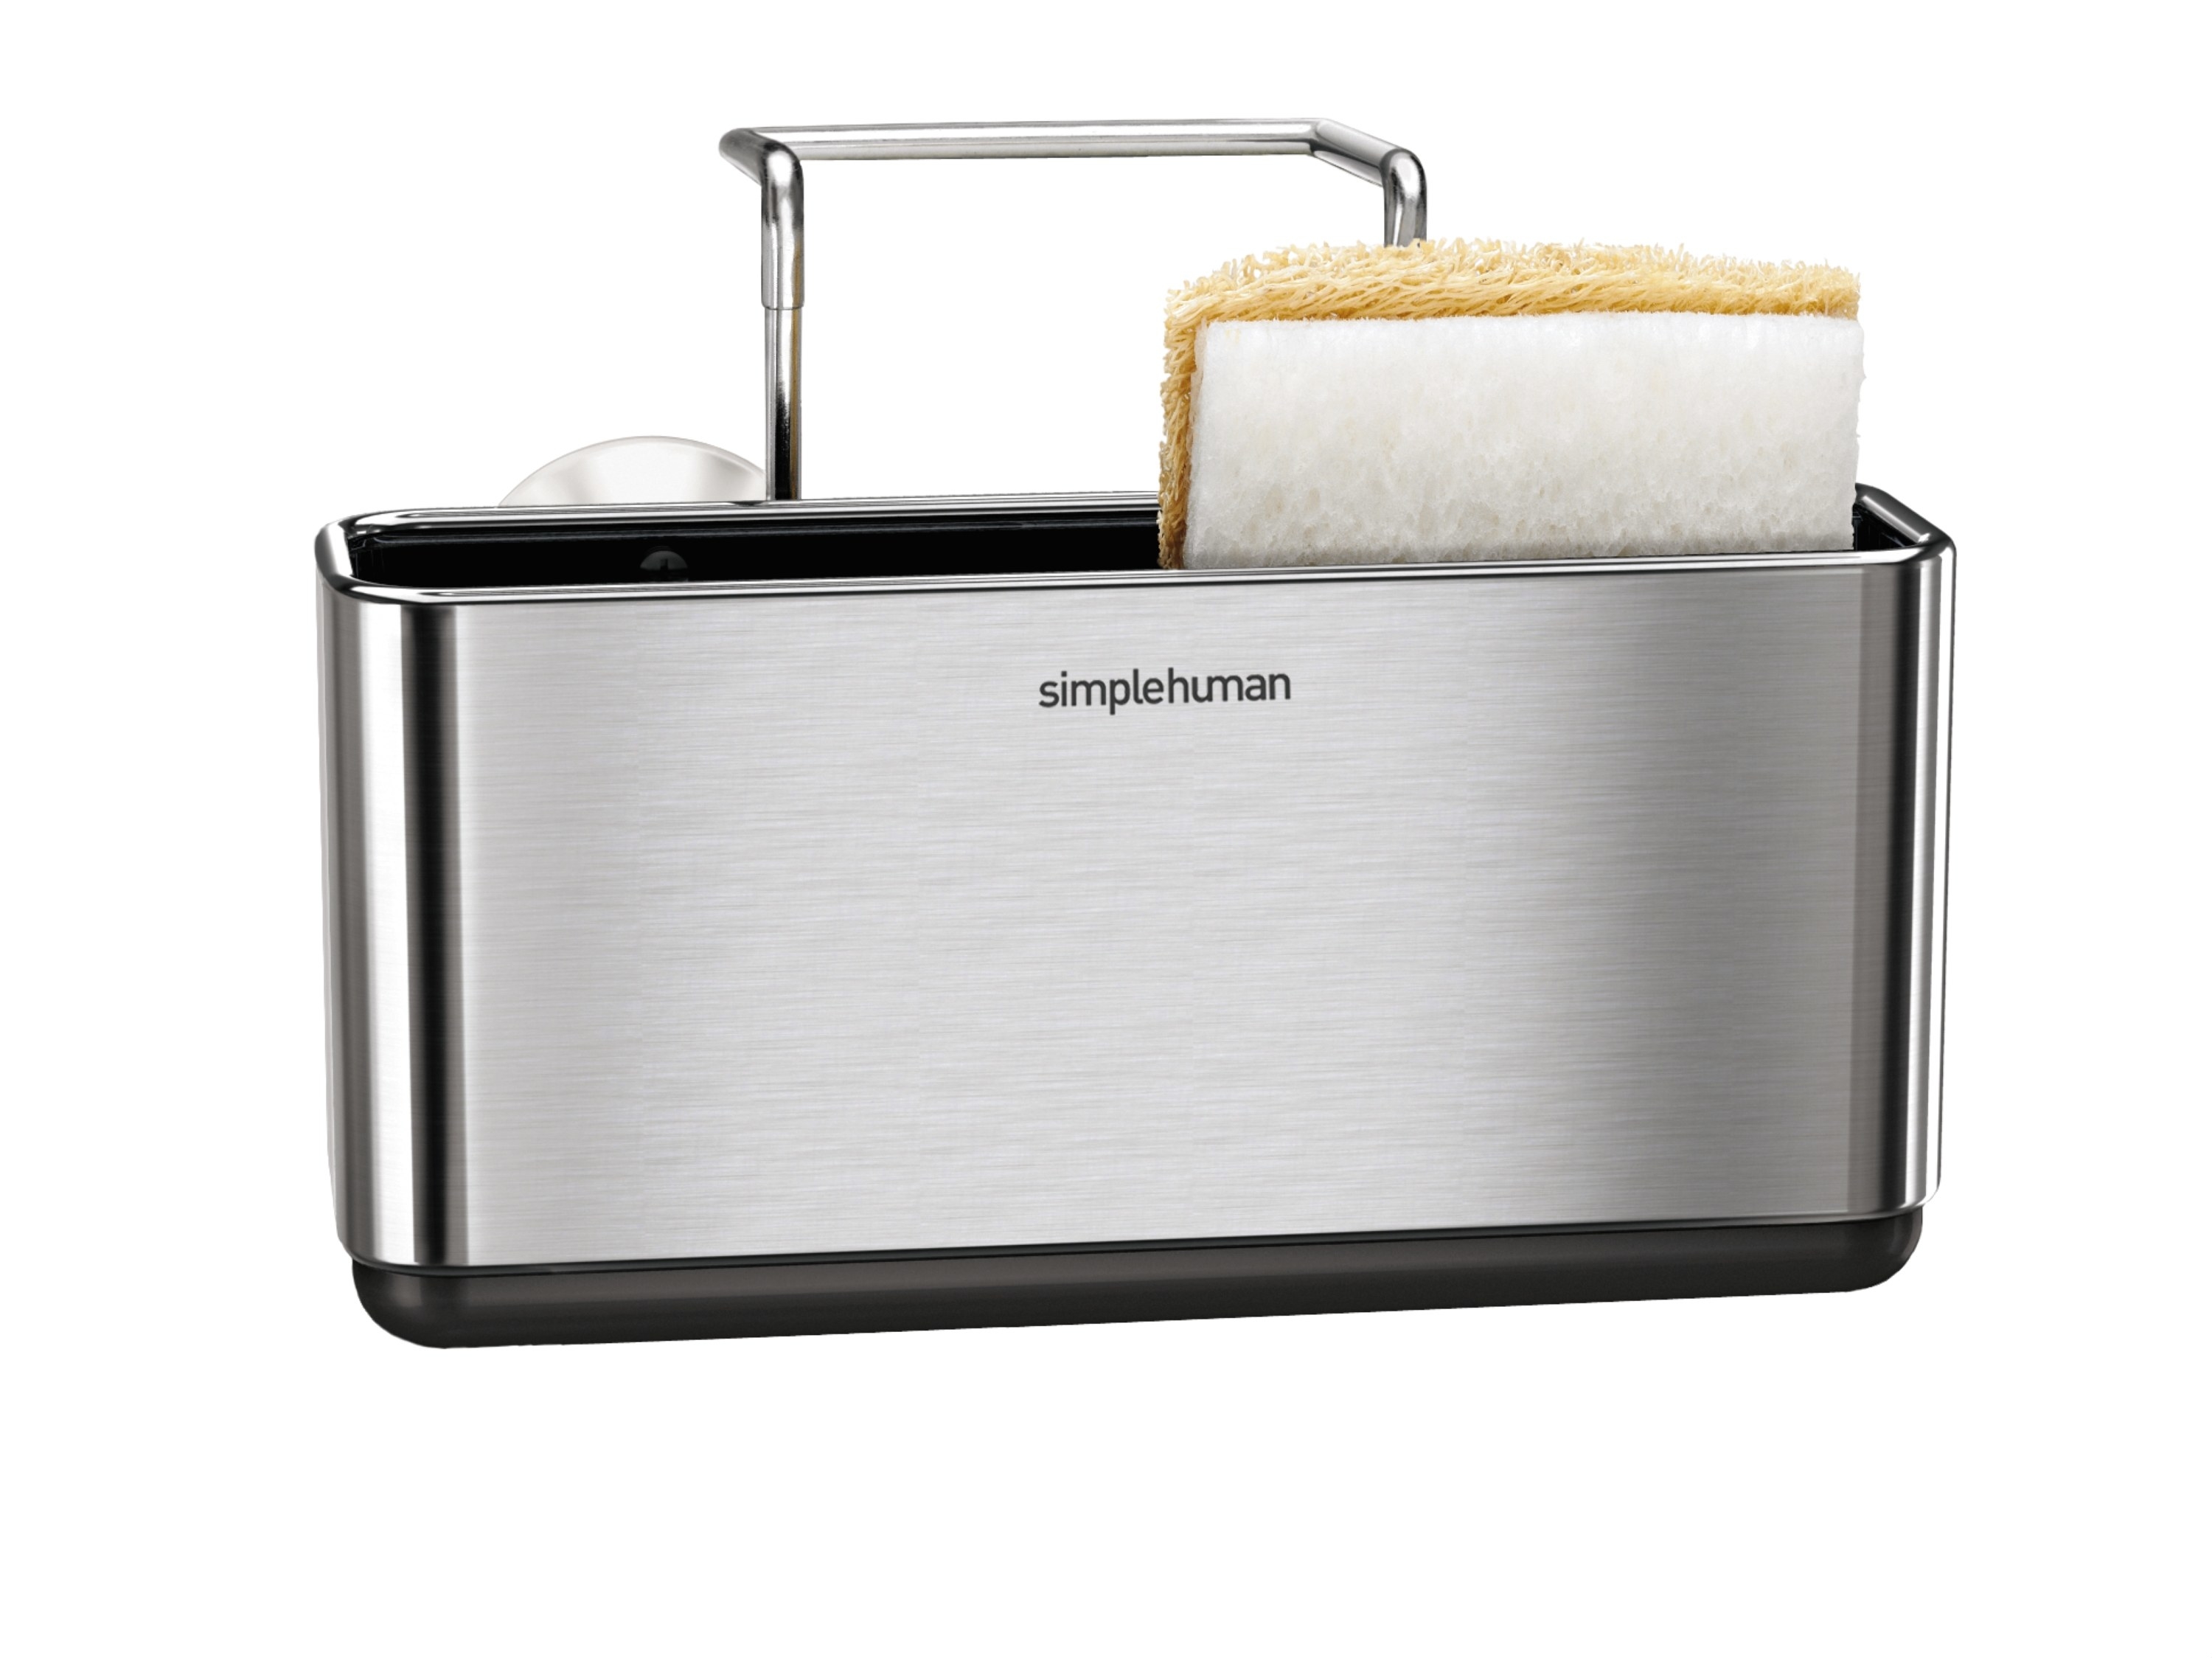 stainless steel sink caddy with sponge inside